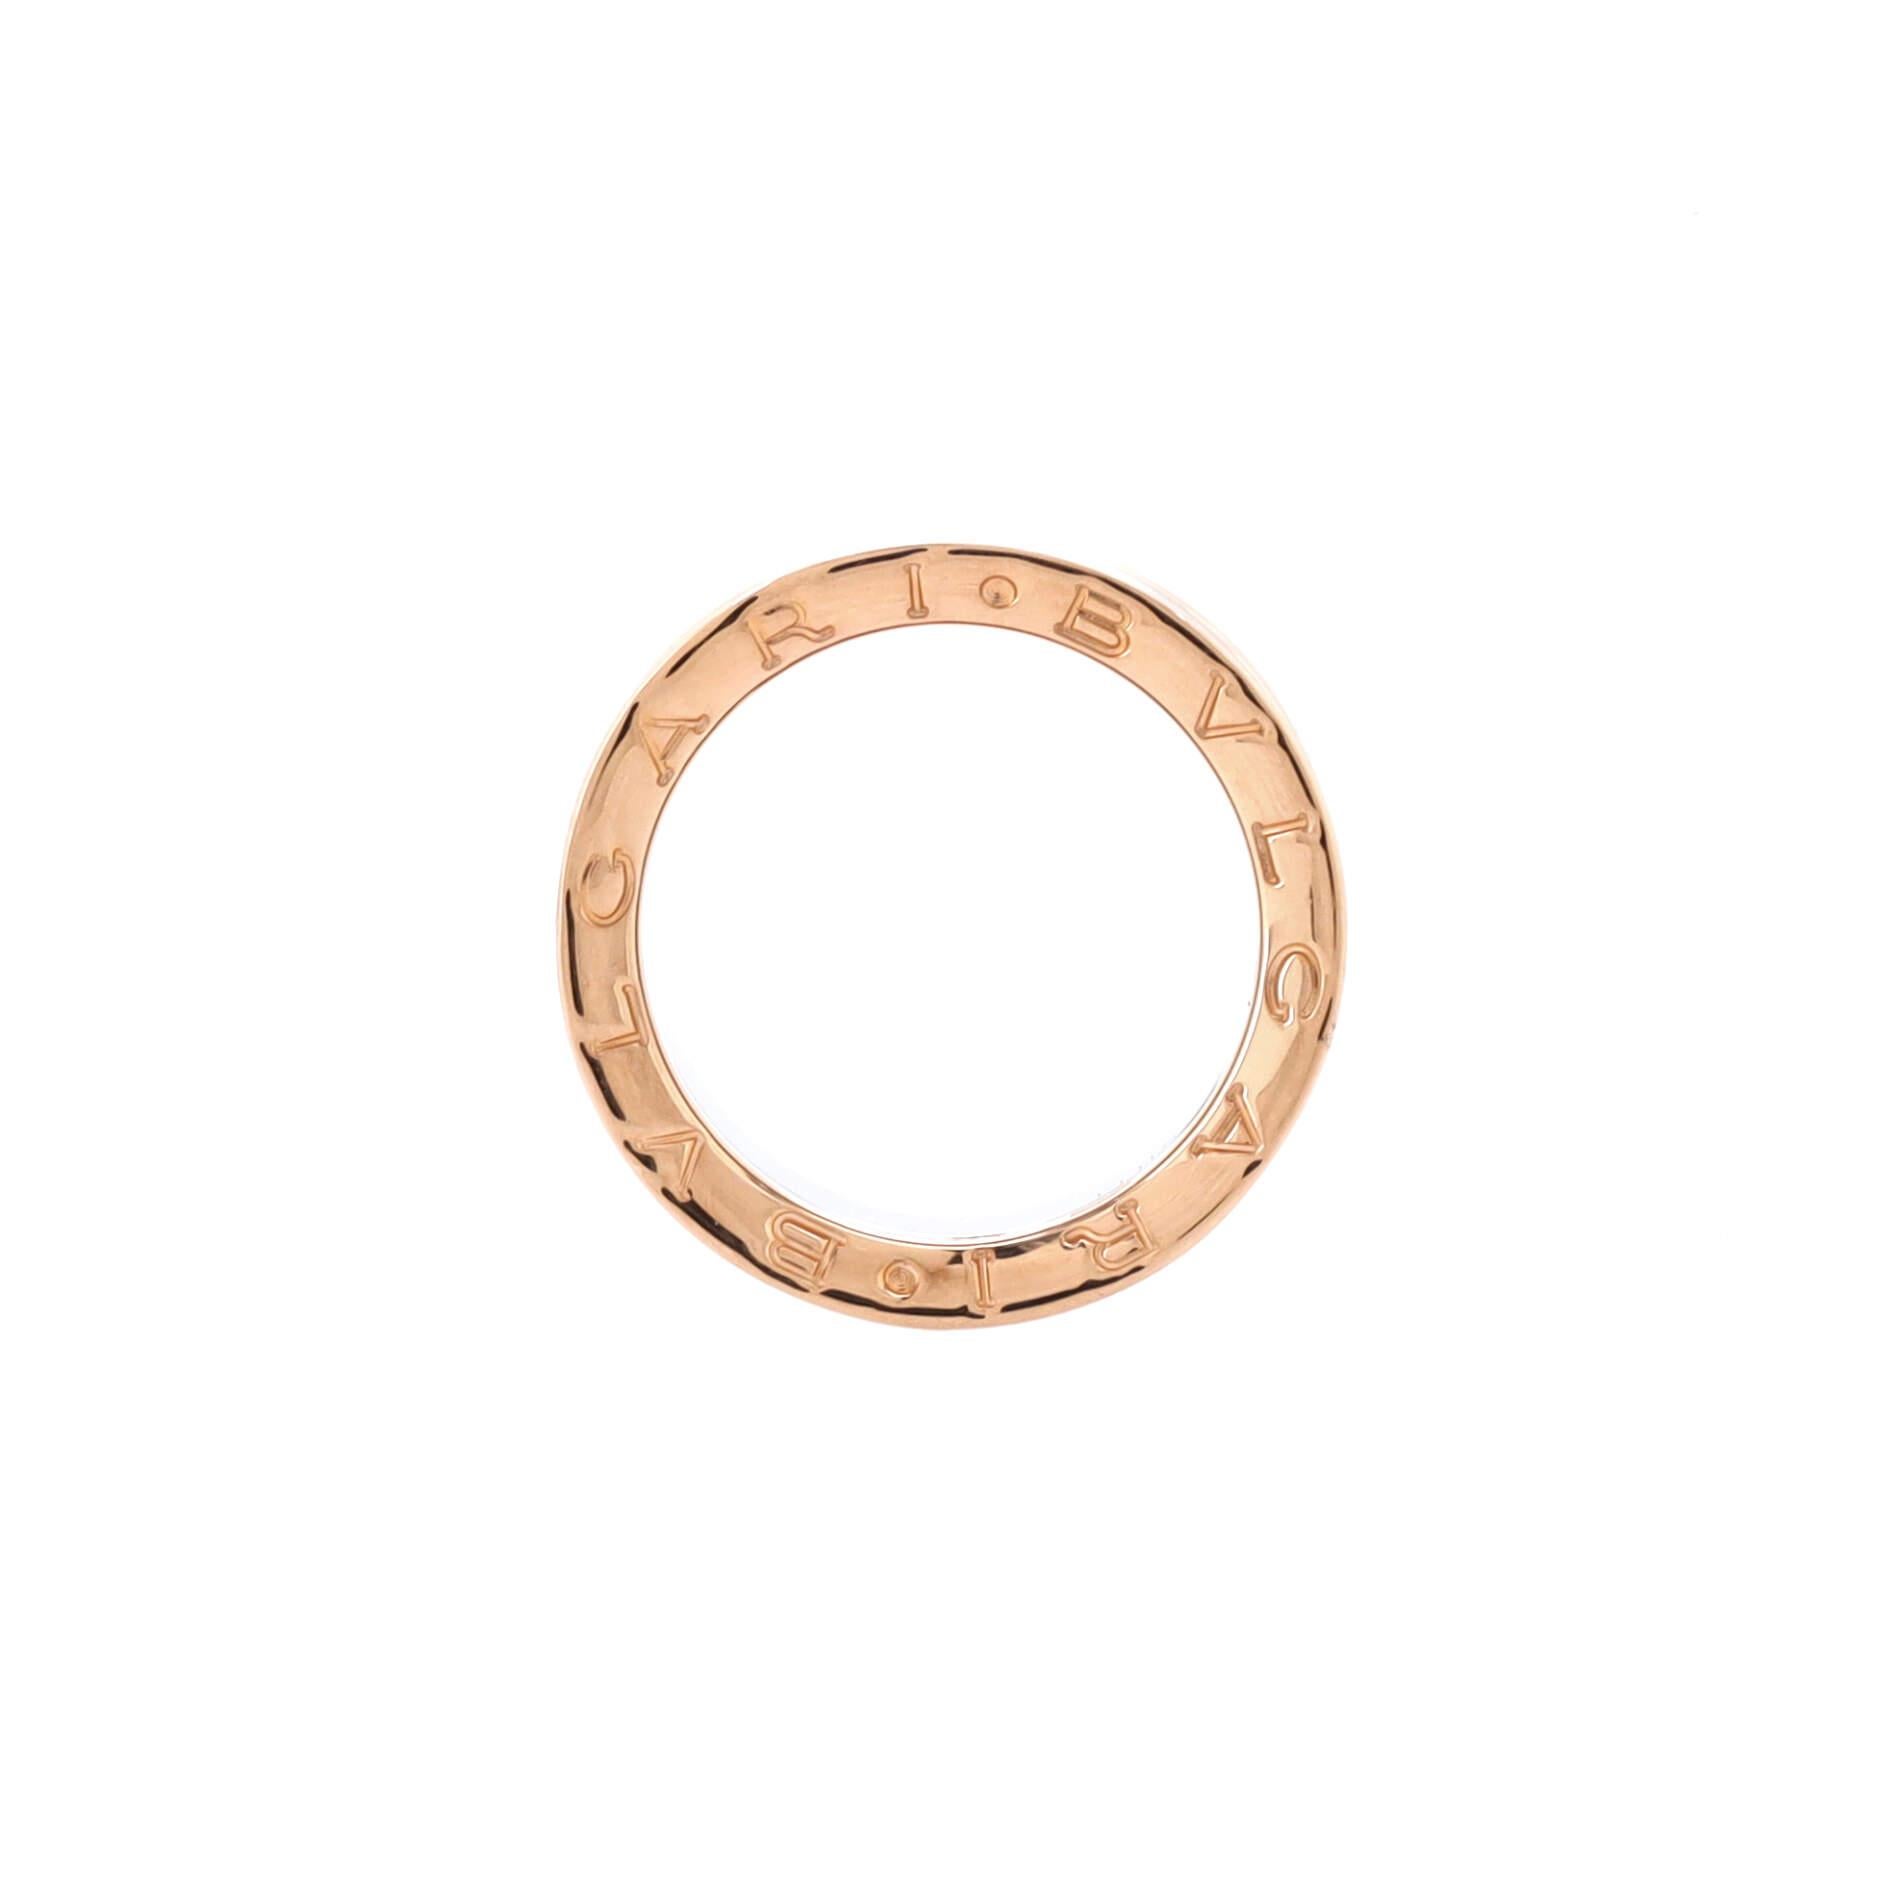 Condition: Very good. Moderate wear with re-polish throughout.
Accessories: No Accessories
Measurements: Size: 5.75 - 51, Width: 12.25 mm
Designer: Bvlgari
Model: B.Zero1 Anish Kapoor Band Ring 18K Rose Gold and Stainless Steel
Exterior Color: Rose